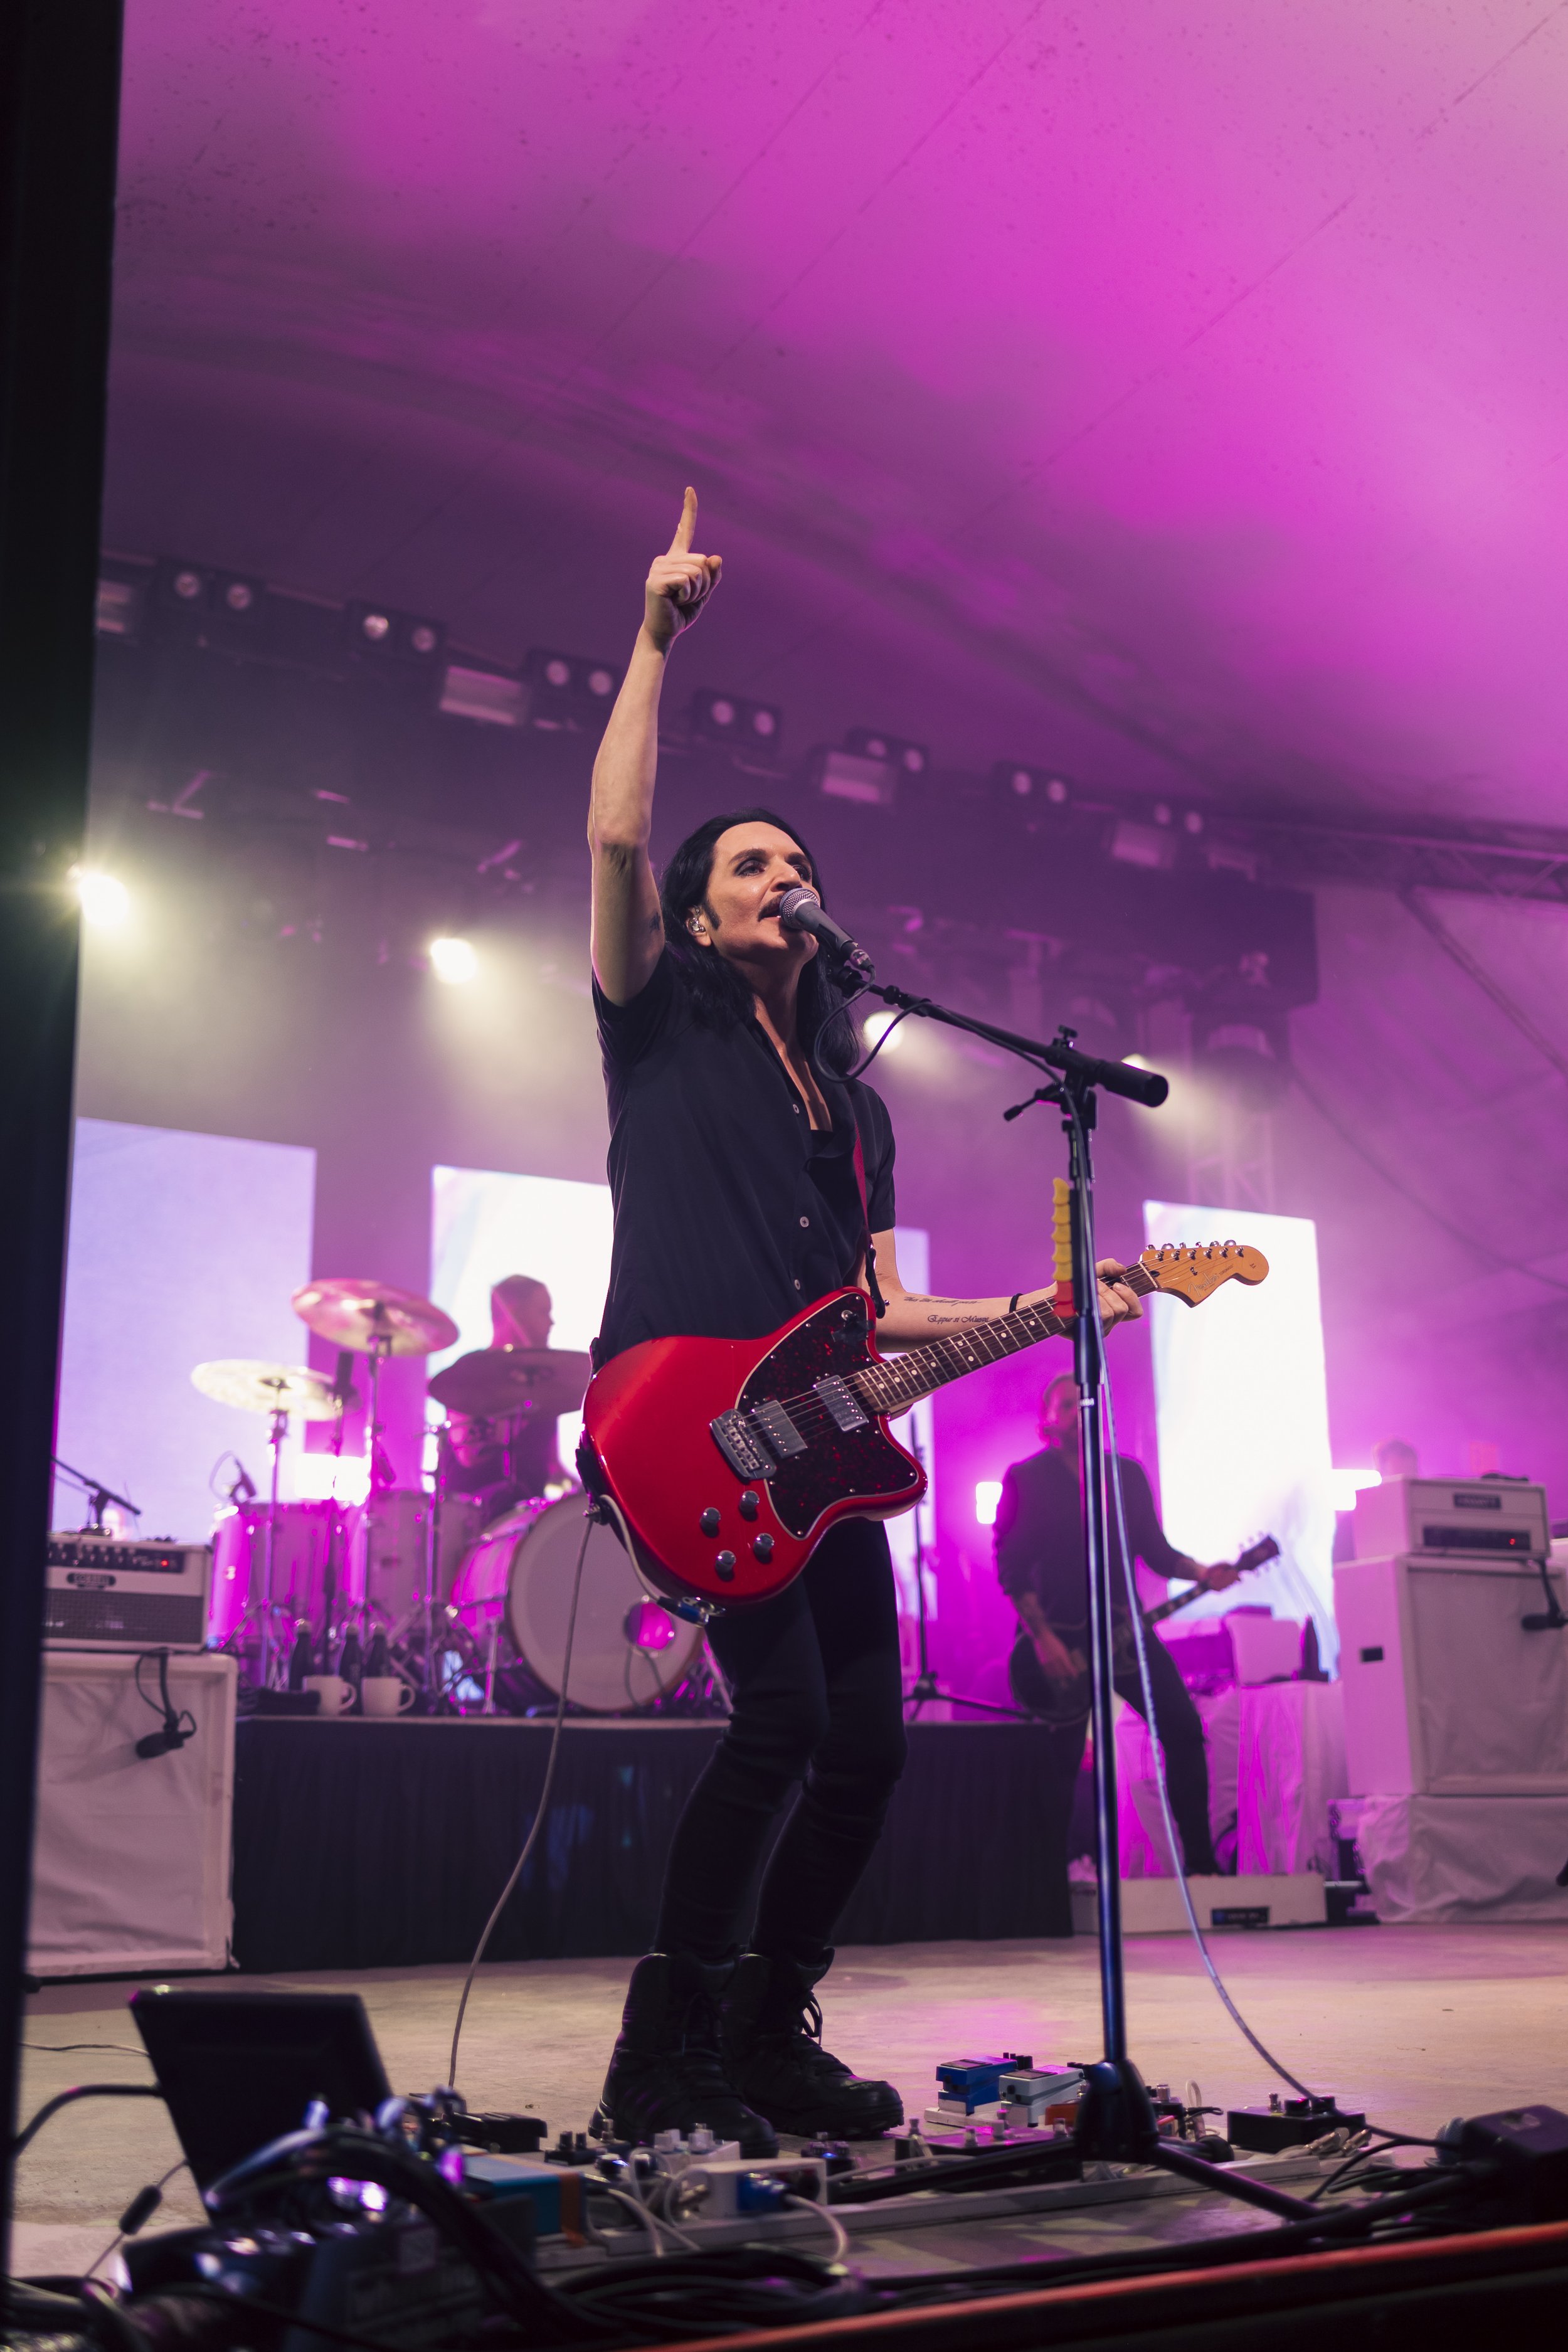  Brian Moloko, vocalist and guitarist for Placebo, matches the fans' enthusiasm while singing. 